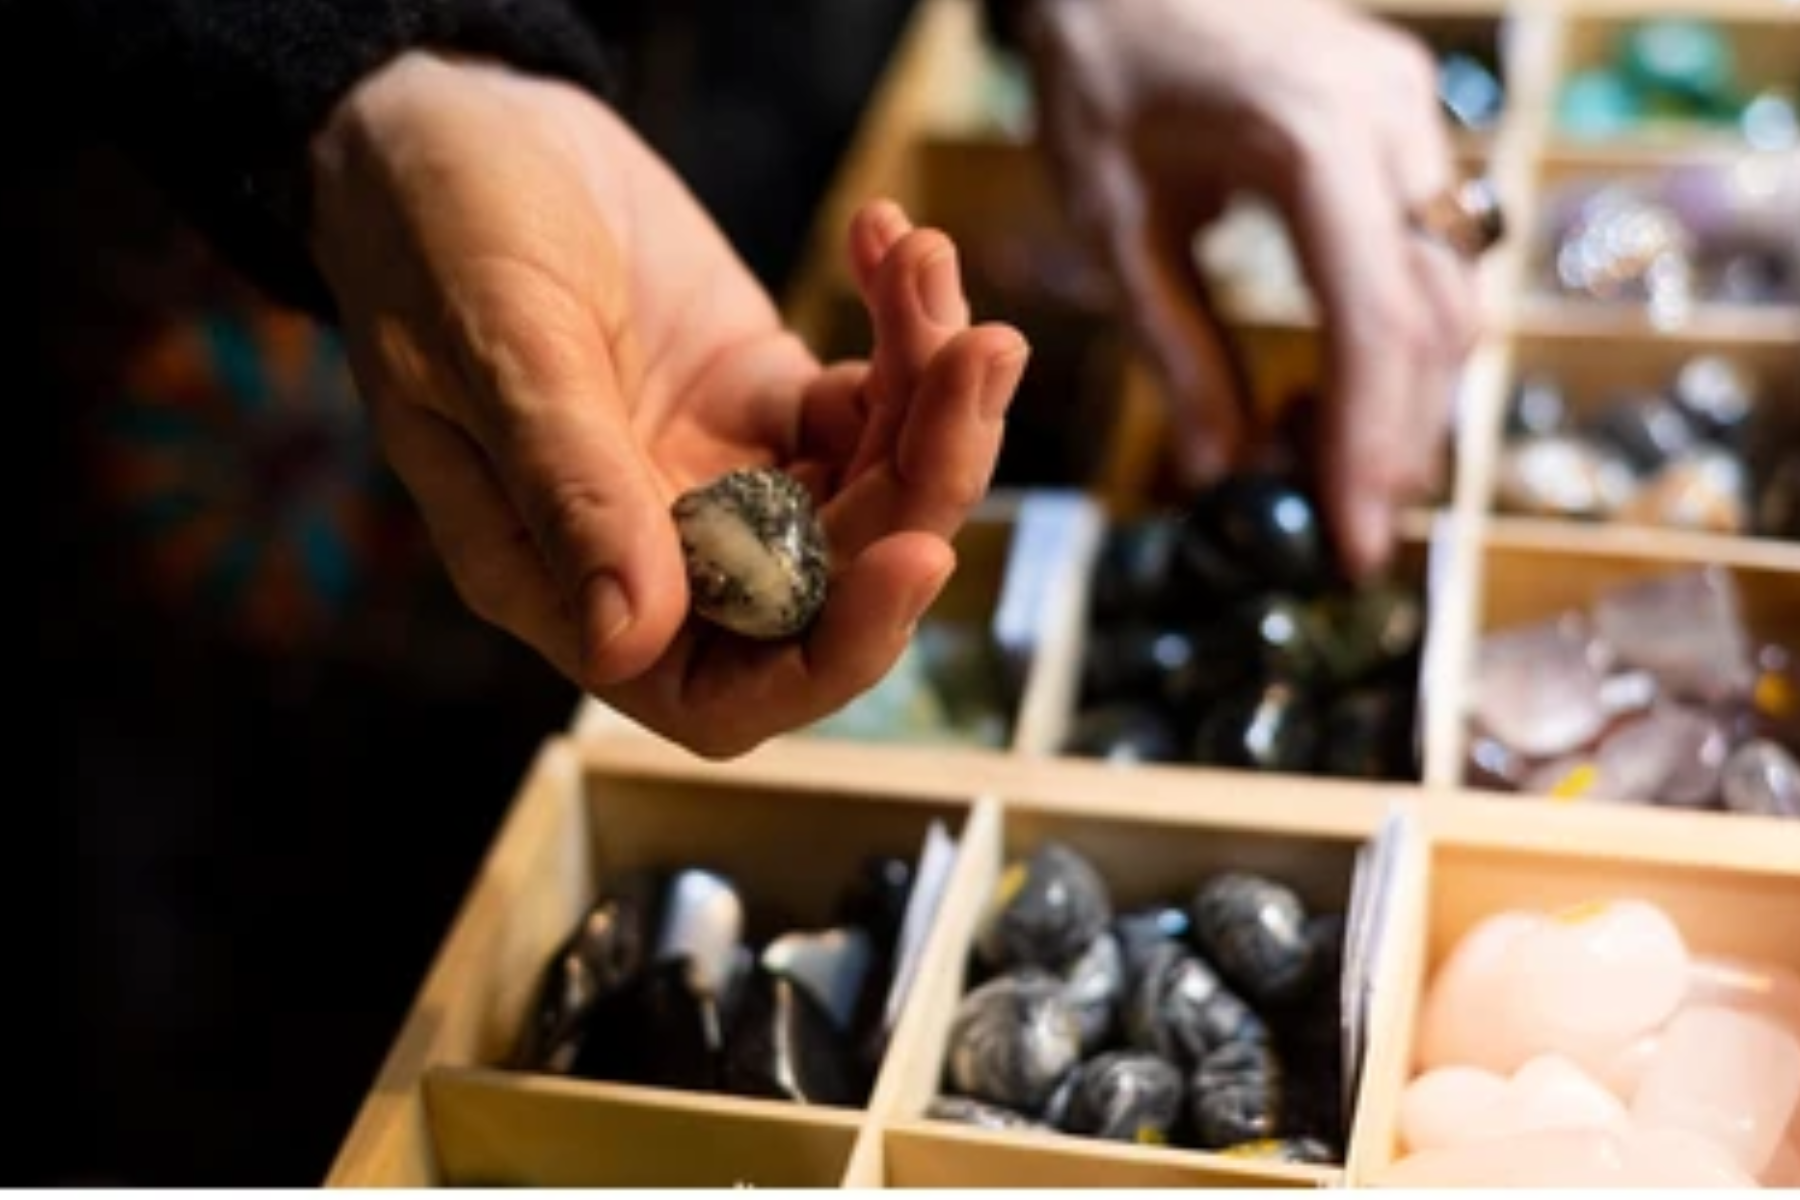 A person's hand selecting a gemstone from the boxes